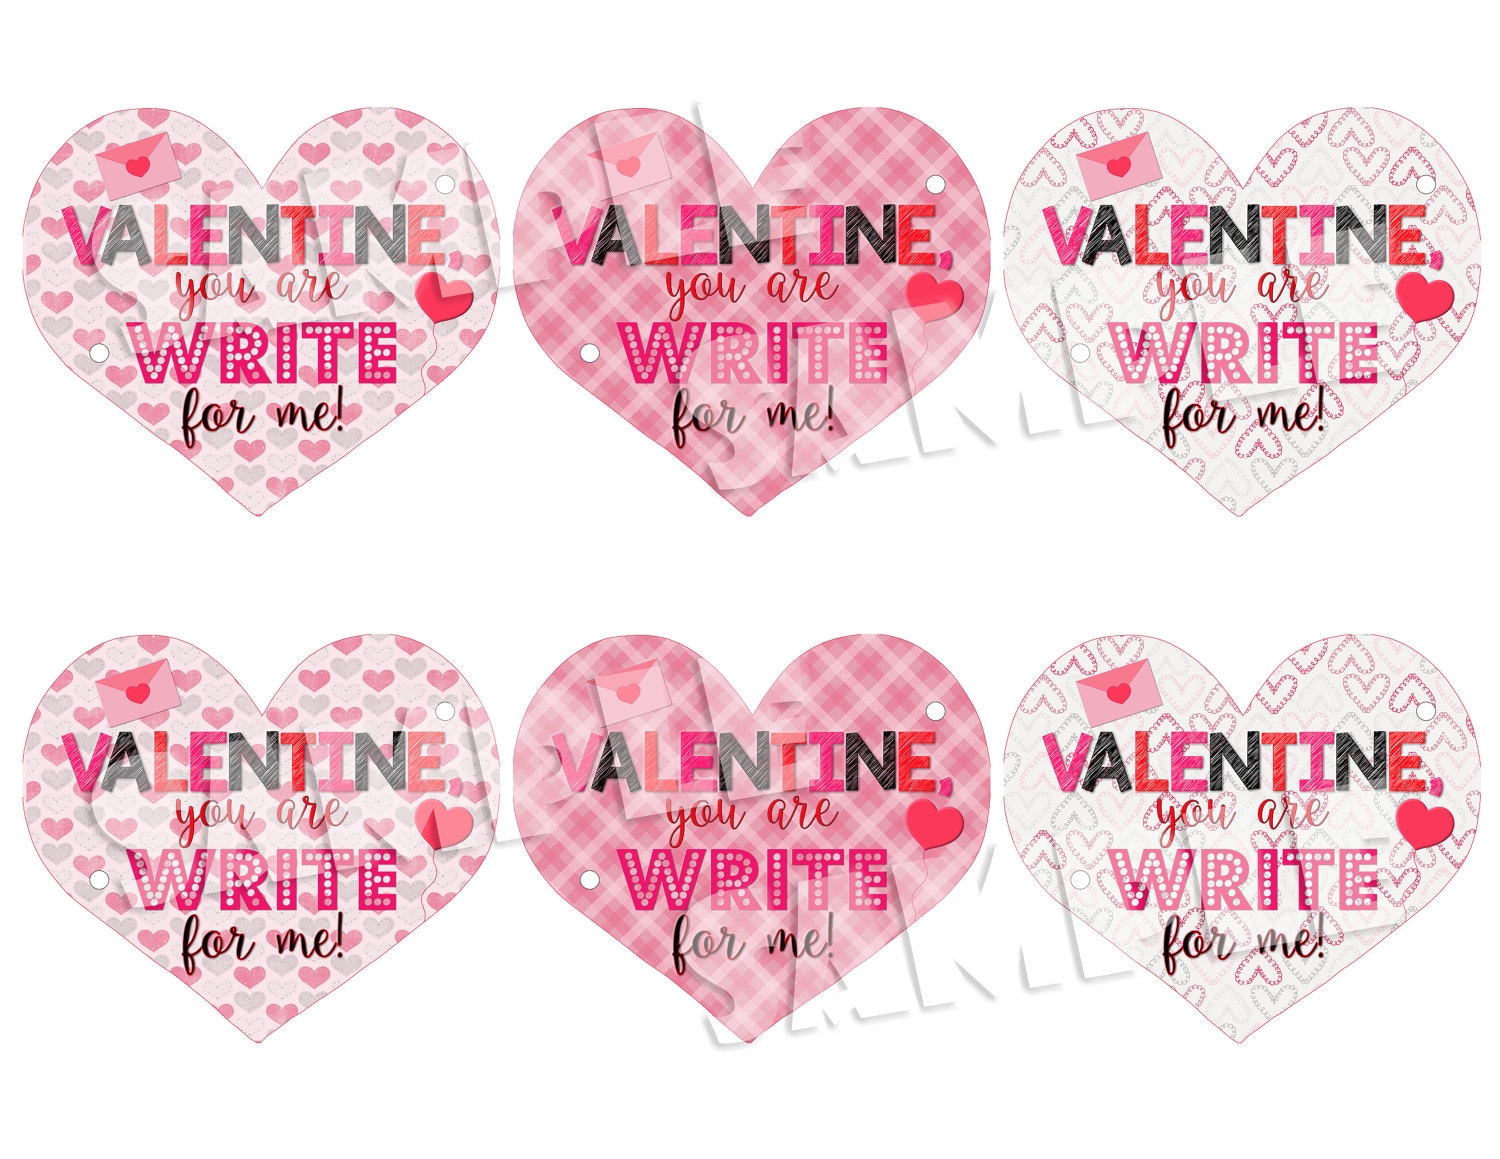 Free Printable Heart Valentine Cards To Give With Pencils  Valentines  cards, Free valentines day cards, Valentine heart card